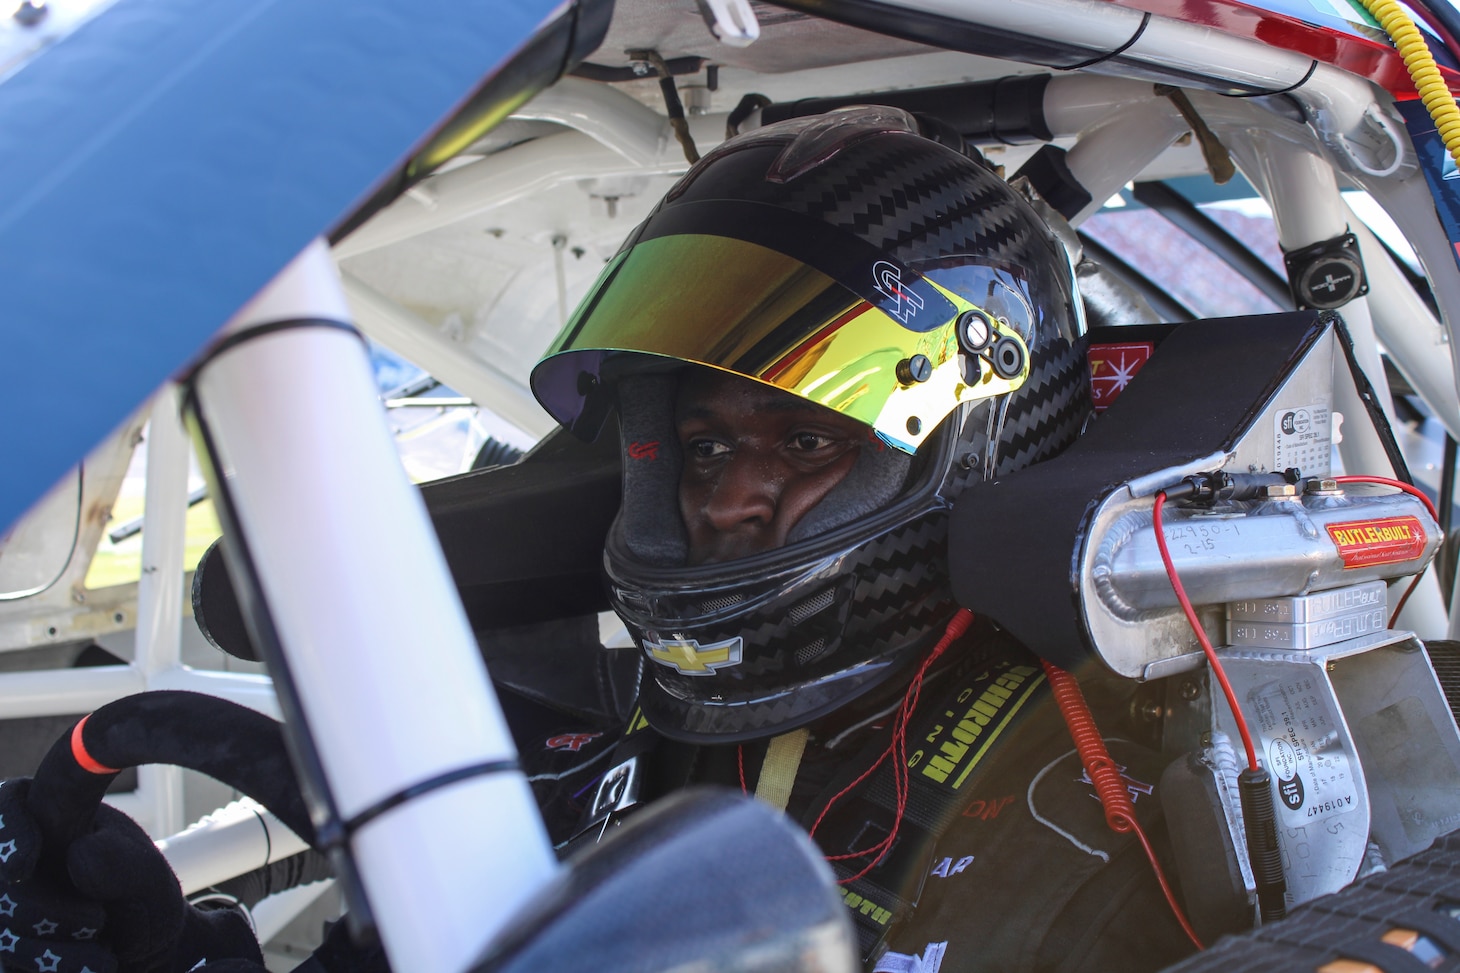 Navy Reserve Sailor and professional NASCAR driver, Lt. Cmdr. Jesse Iwuji, prepares to race at Talladega Superspeedway on Apr. 22, 2022.